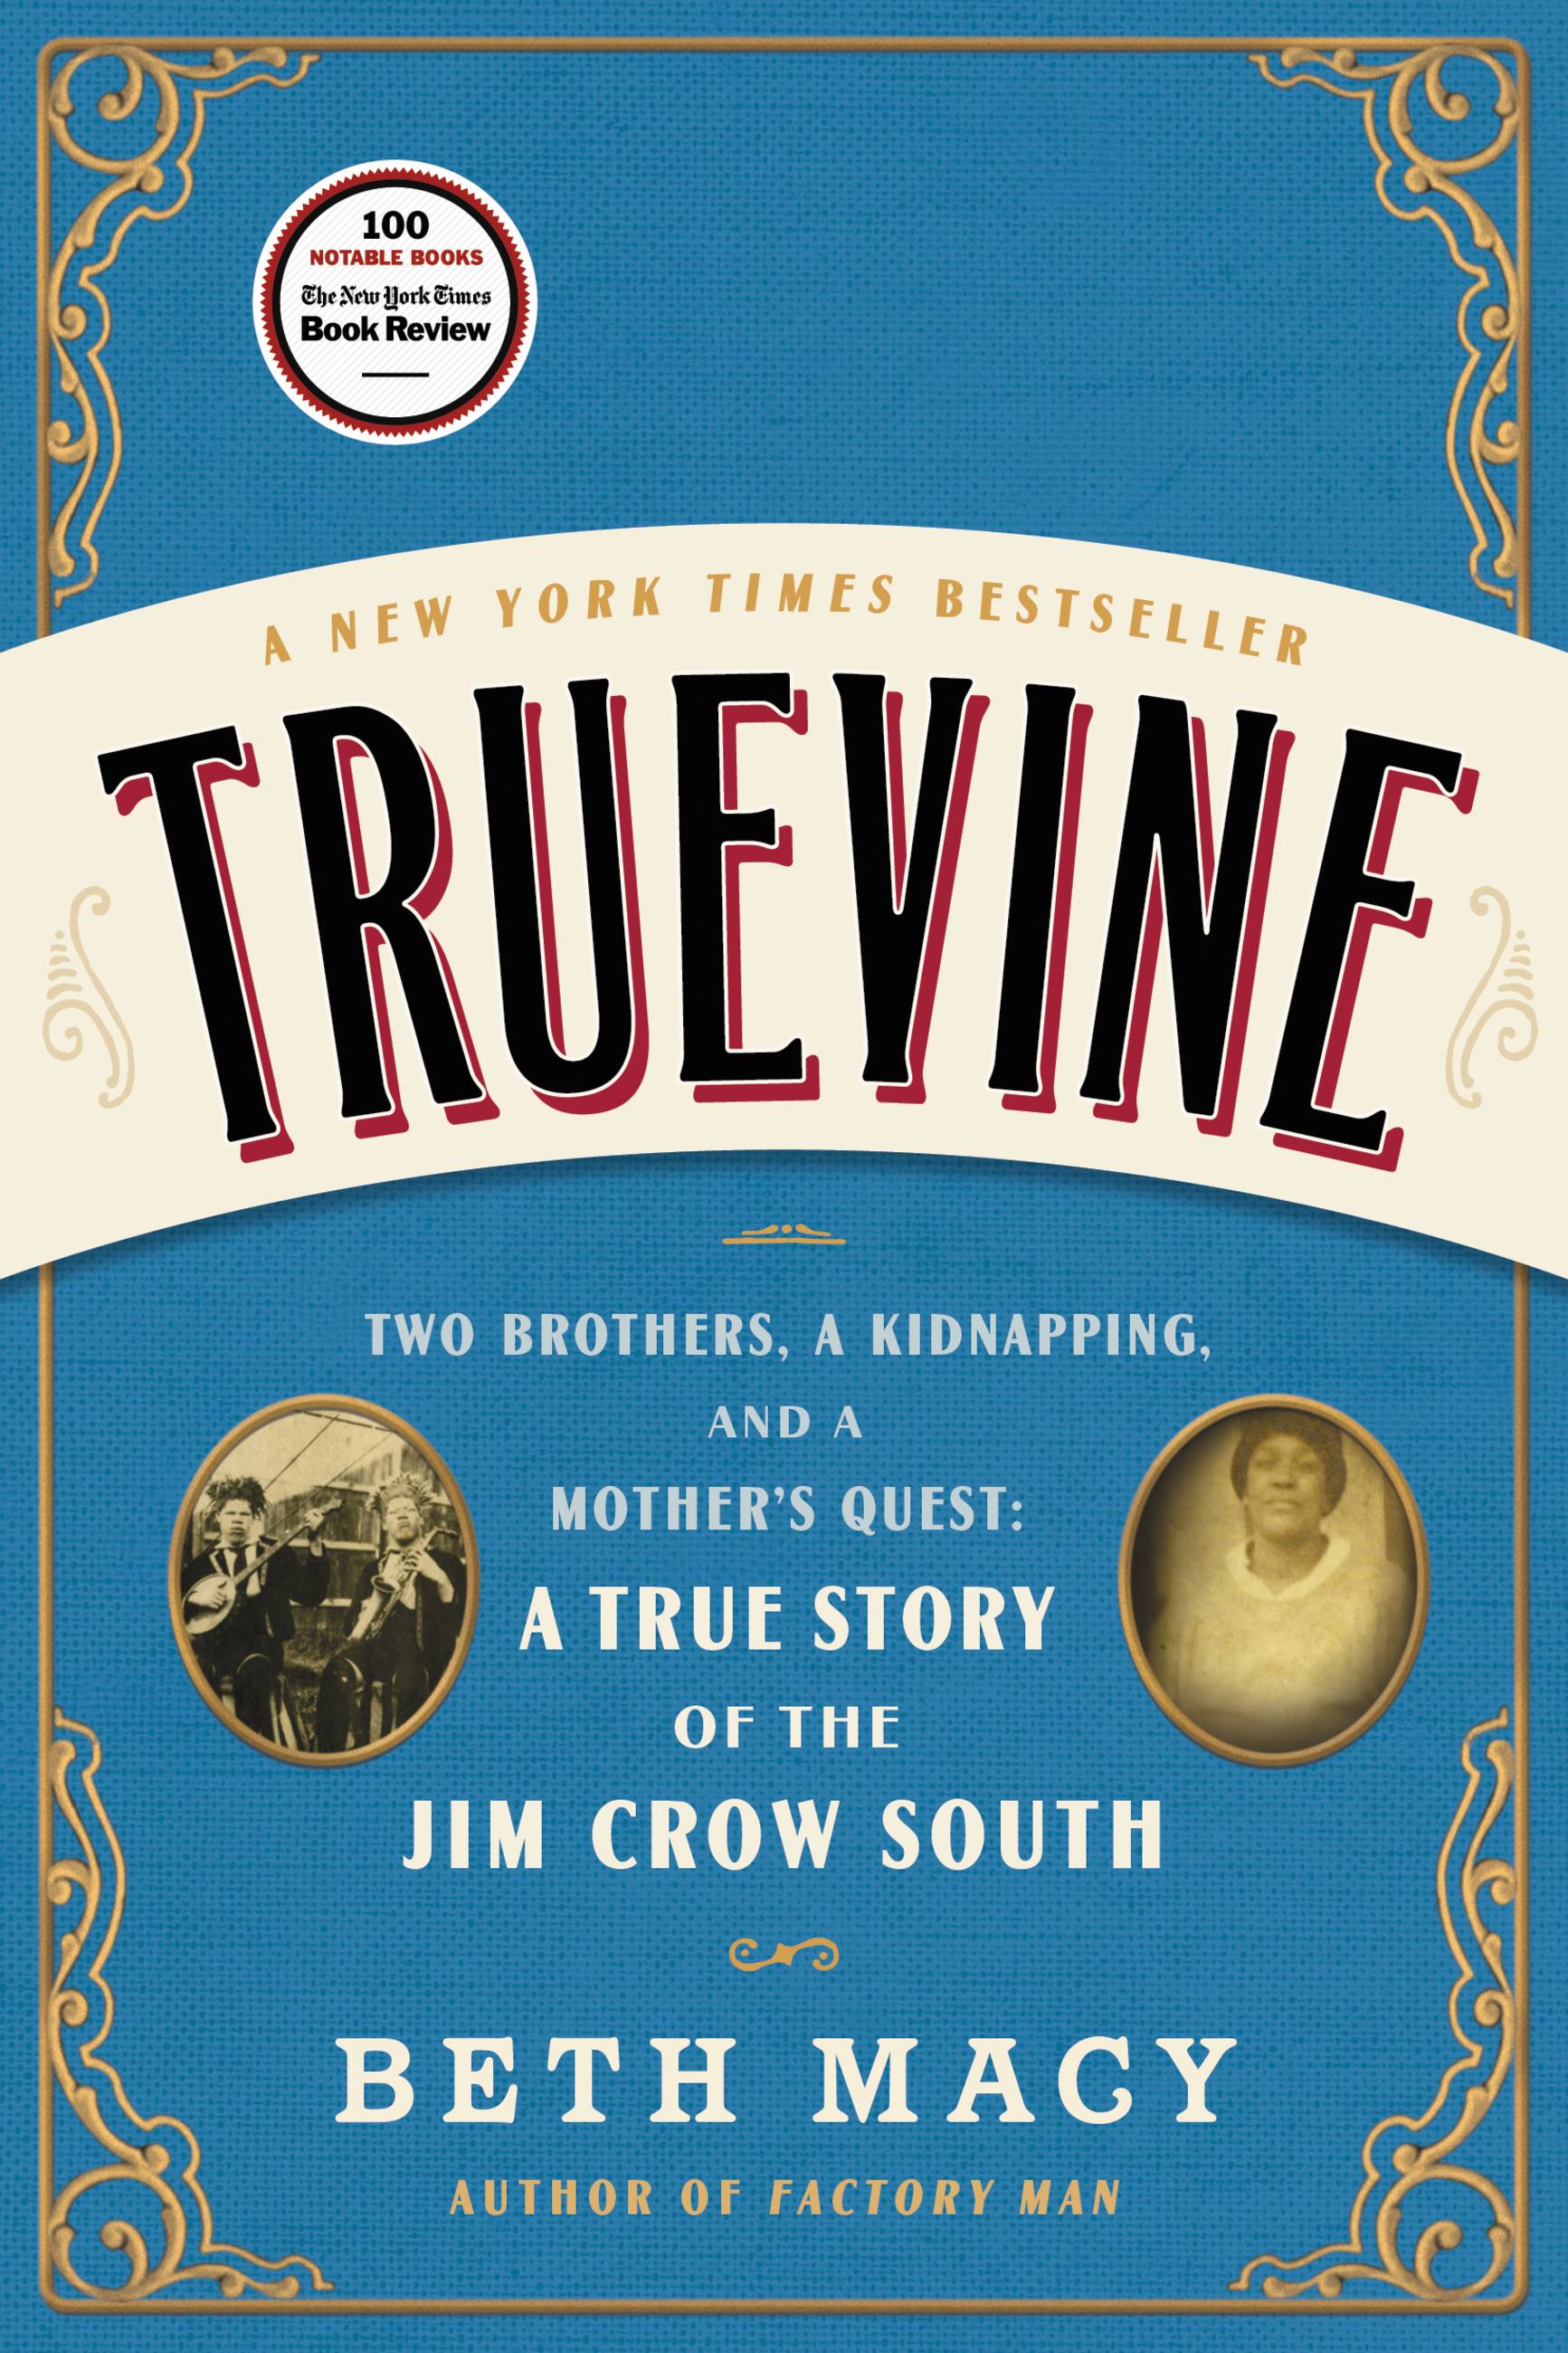 Cover image for Truevine [electronic resource] : Two Brothers, a Kidnapping, and a Mother's Quest: A True Story of the Jim Crow South